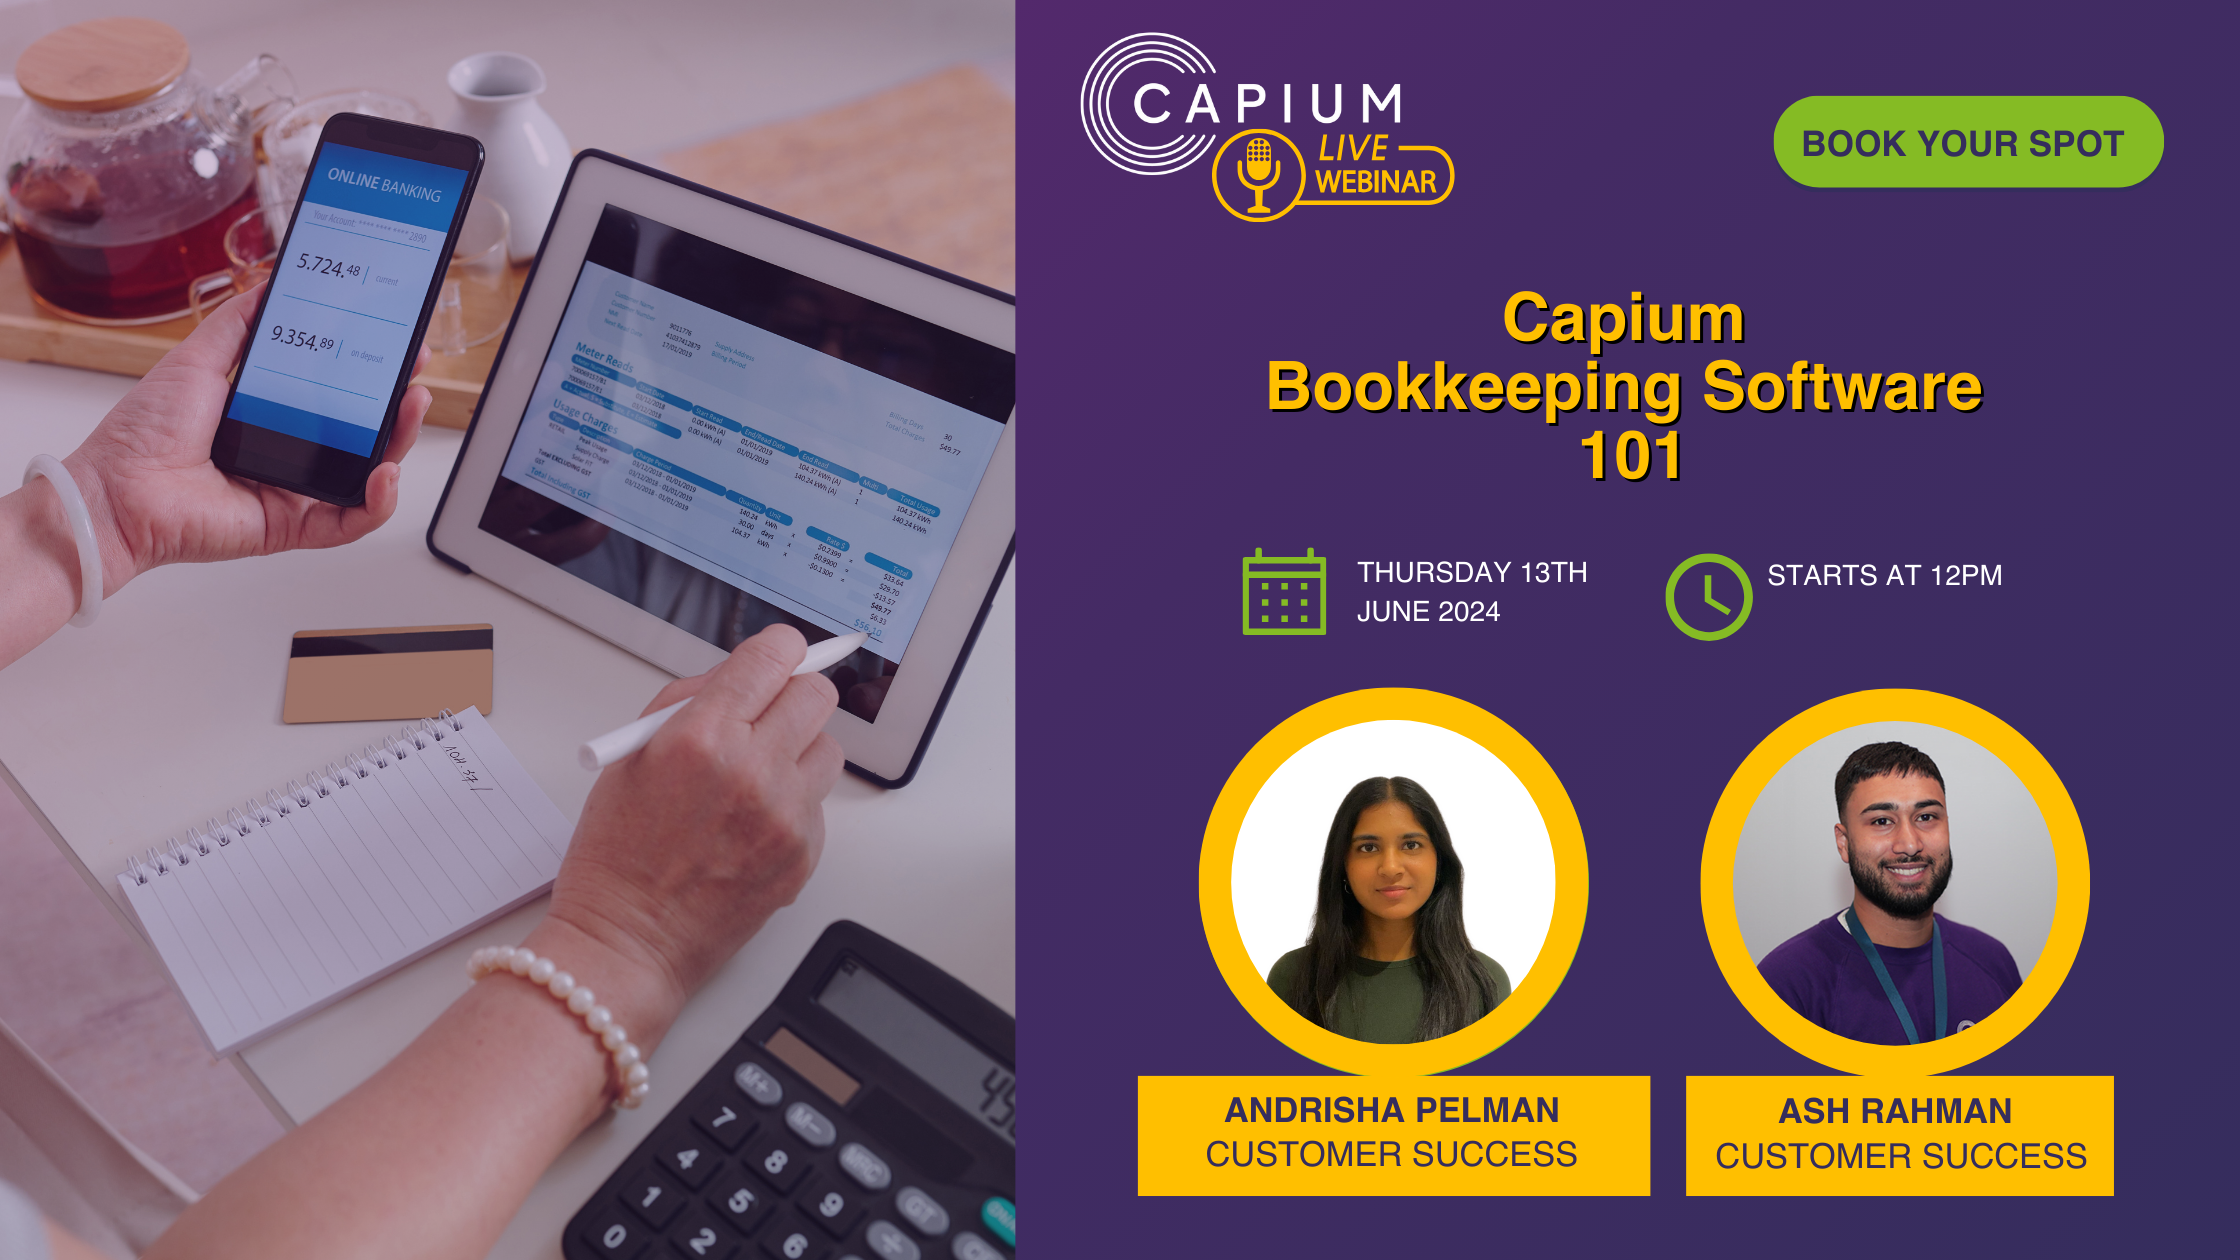 Capium Bookkeeping Software 101 image